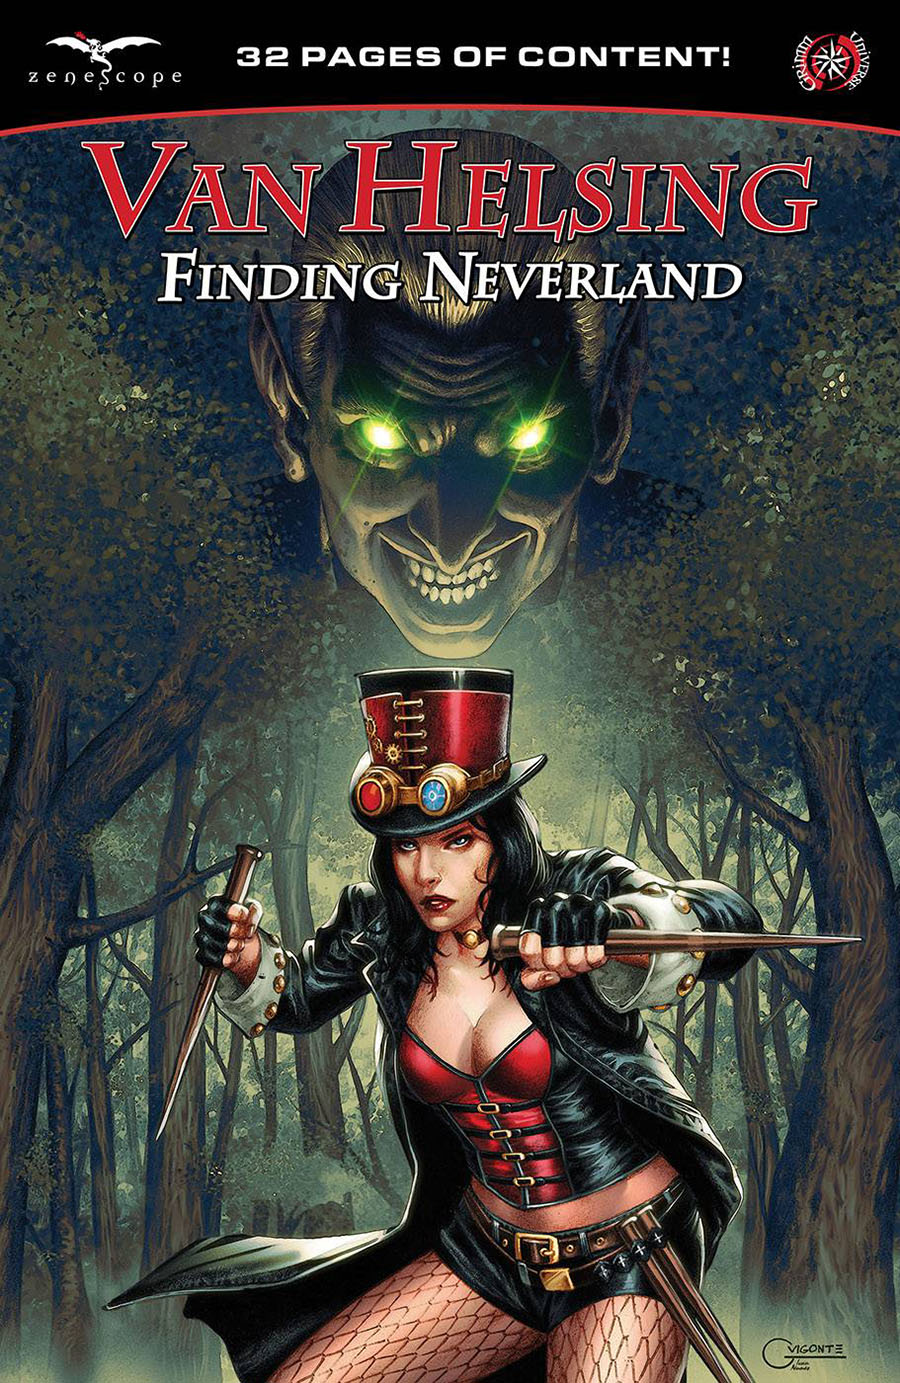 Grimm Fairy Tales Presents Van Helsing Finding Neverland #1 (One Shot) Cover A Geebo Vigonte